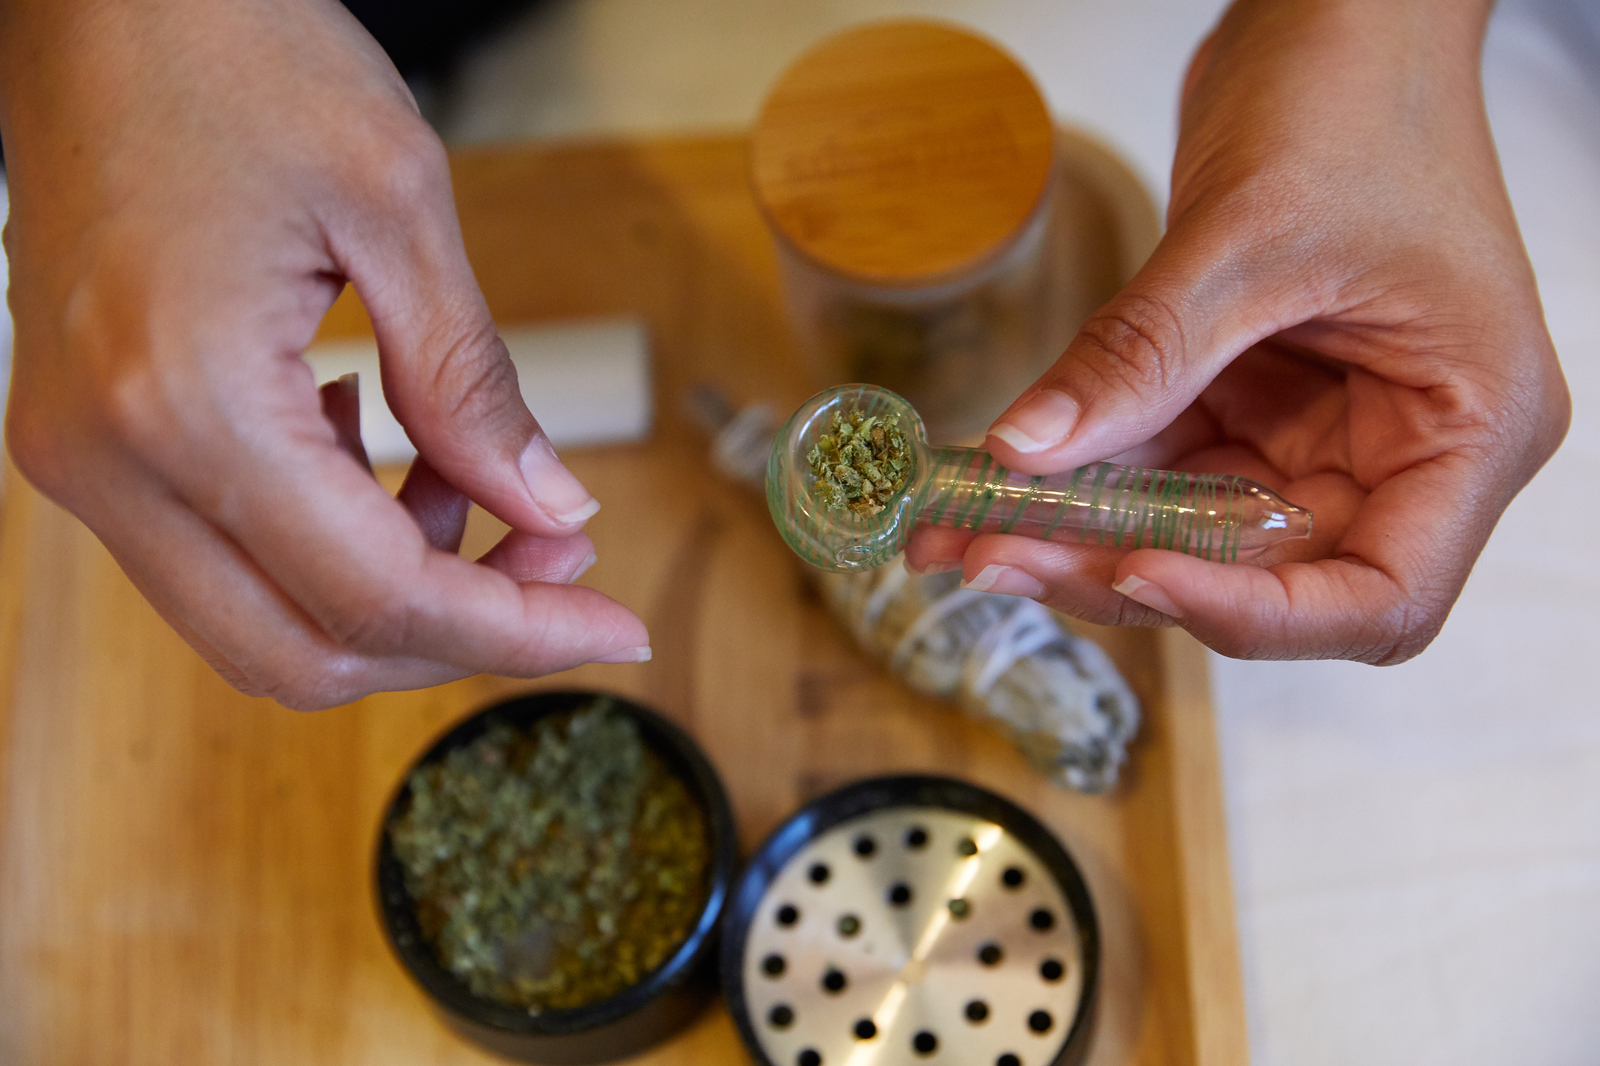 Packing Herb into a Bowl